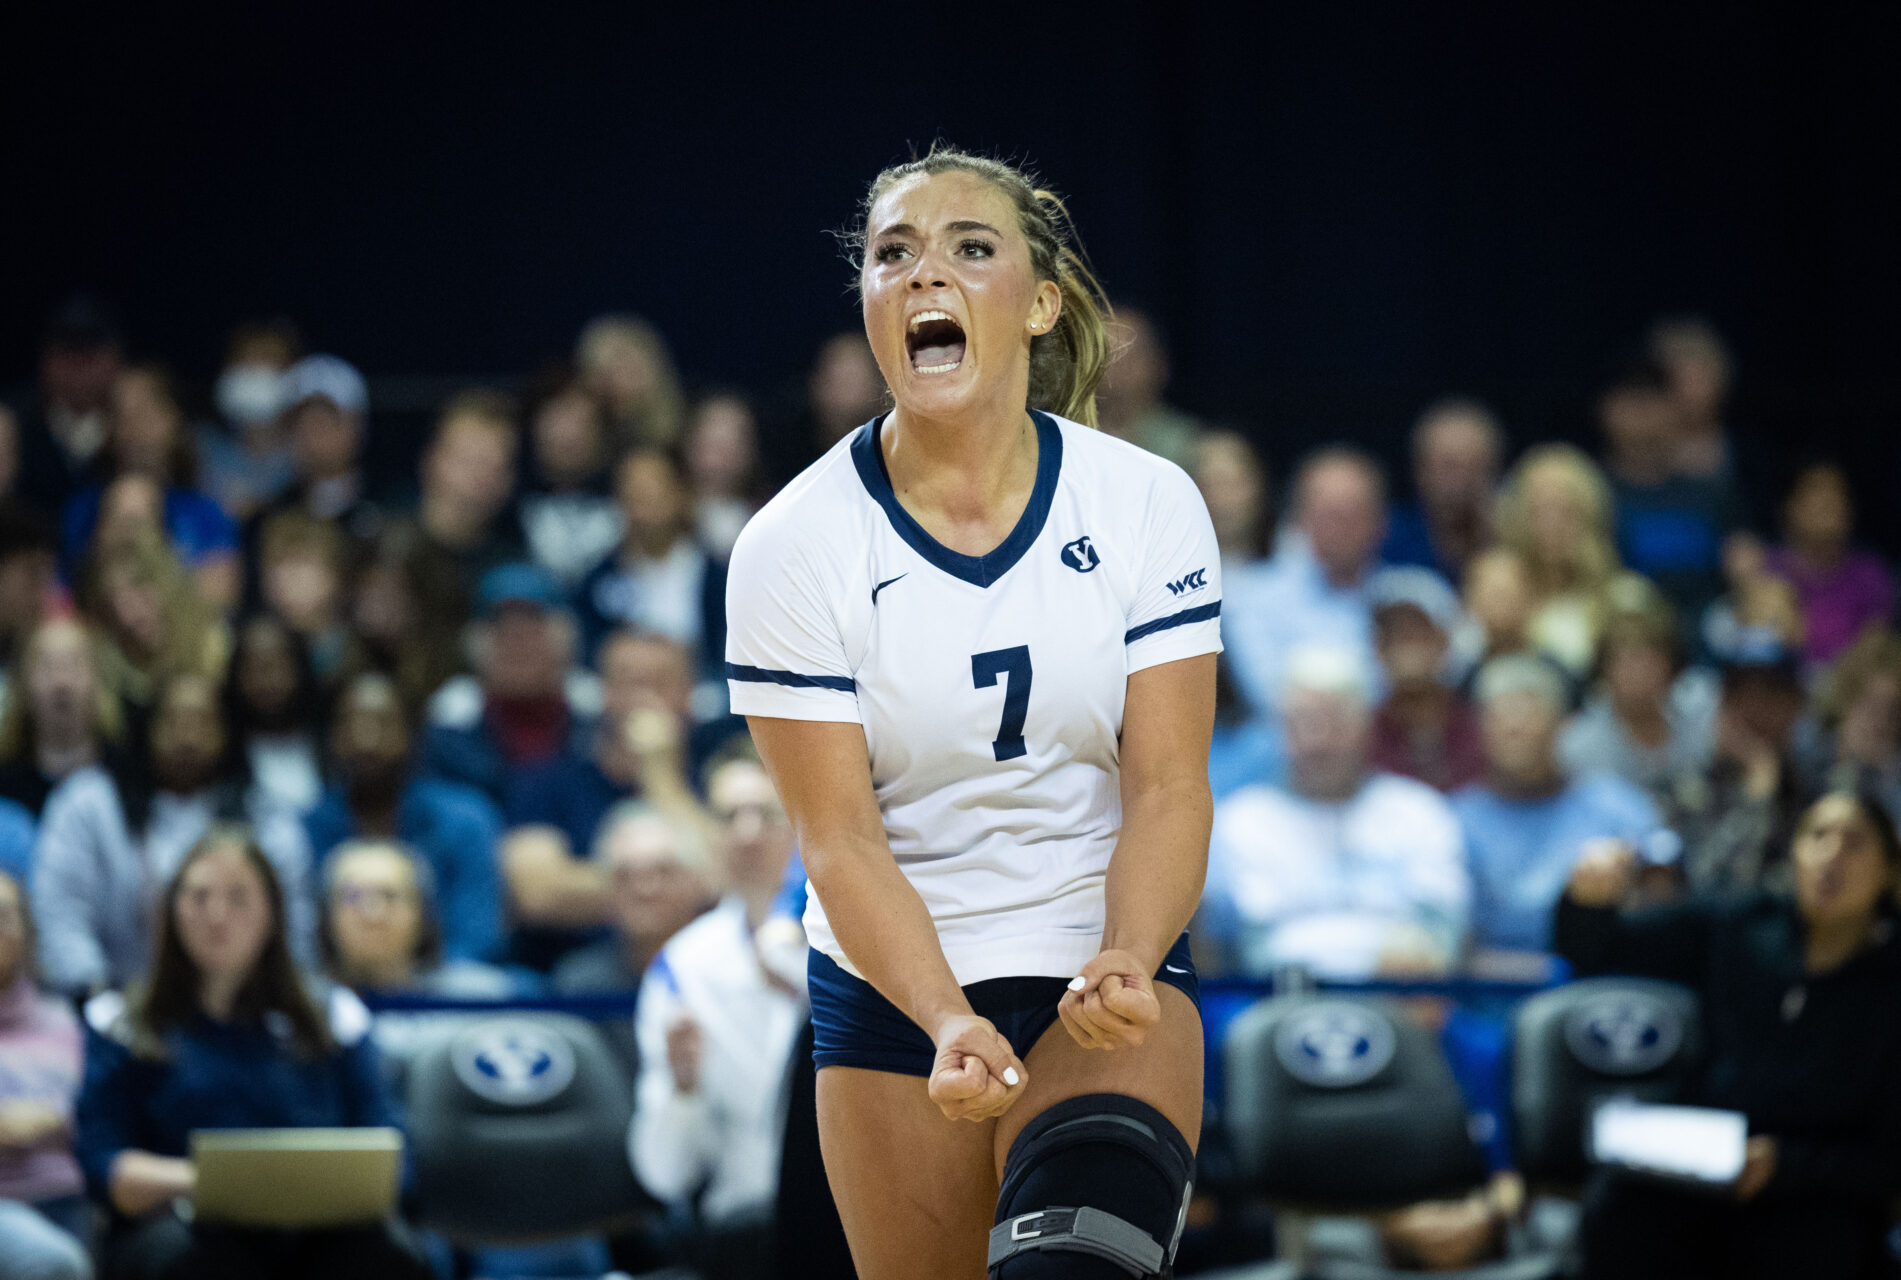 BYU women’s volleyball starts NCAA tournament strong with 3-0 sweep of JMU